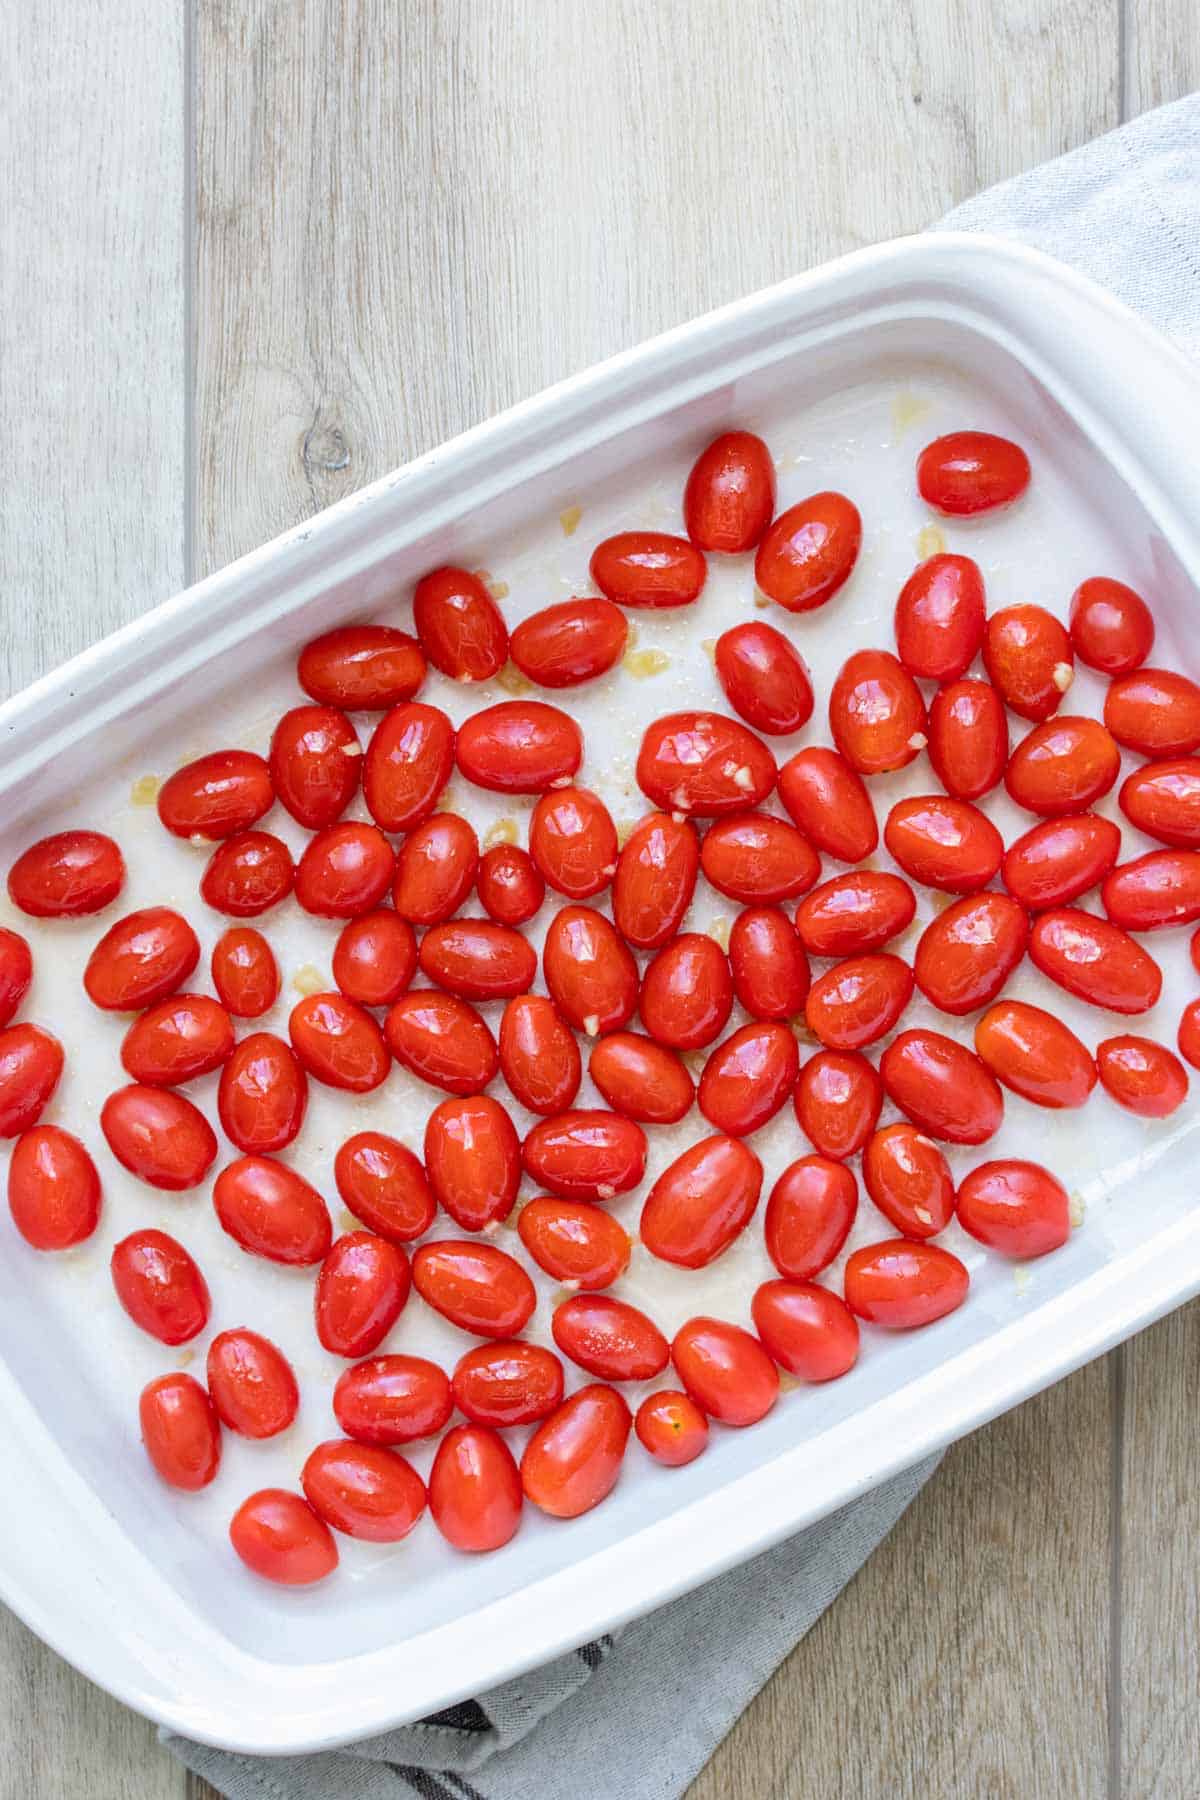 Grape tomatoes spread out in a white baking dish